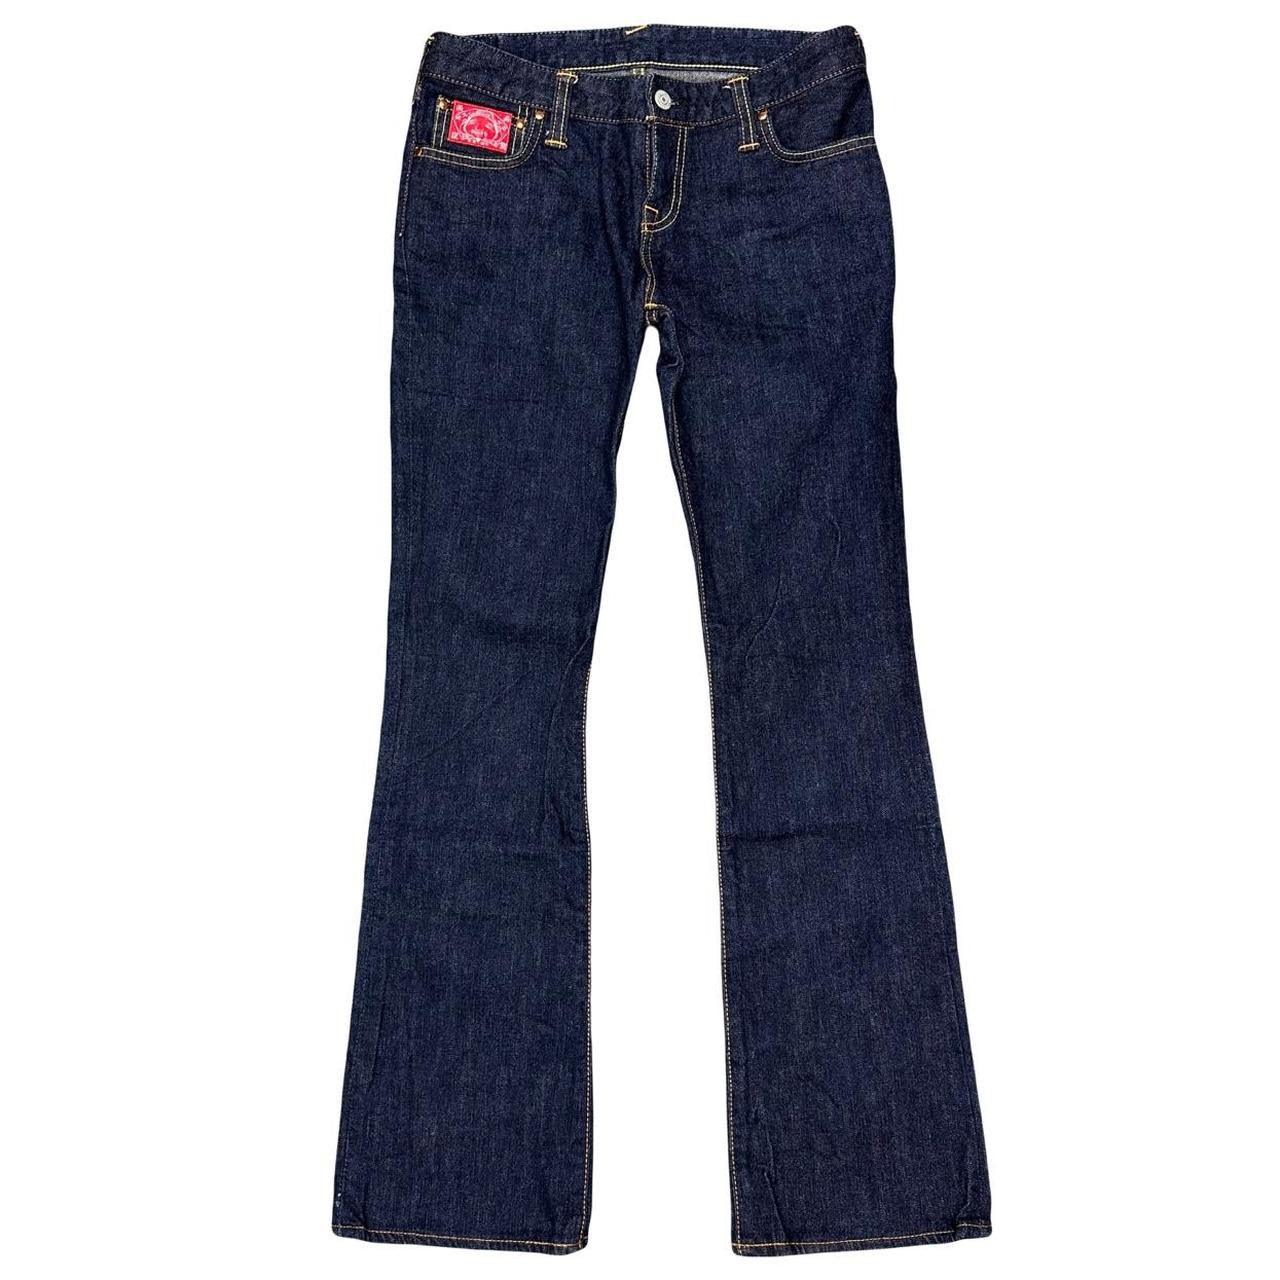 Evisu Selvedge Jeans With Loveheart & Daicock Embroidery ( W28 ) - Known Source